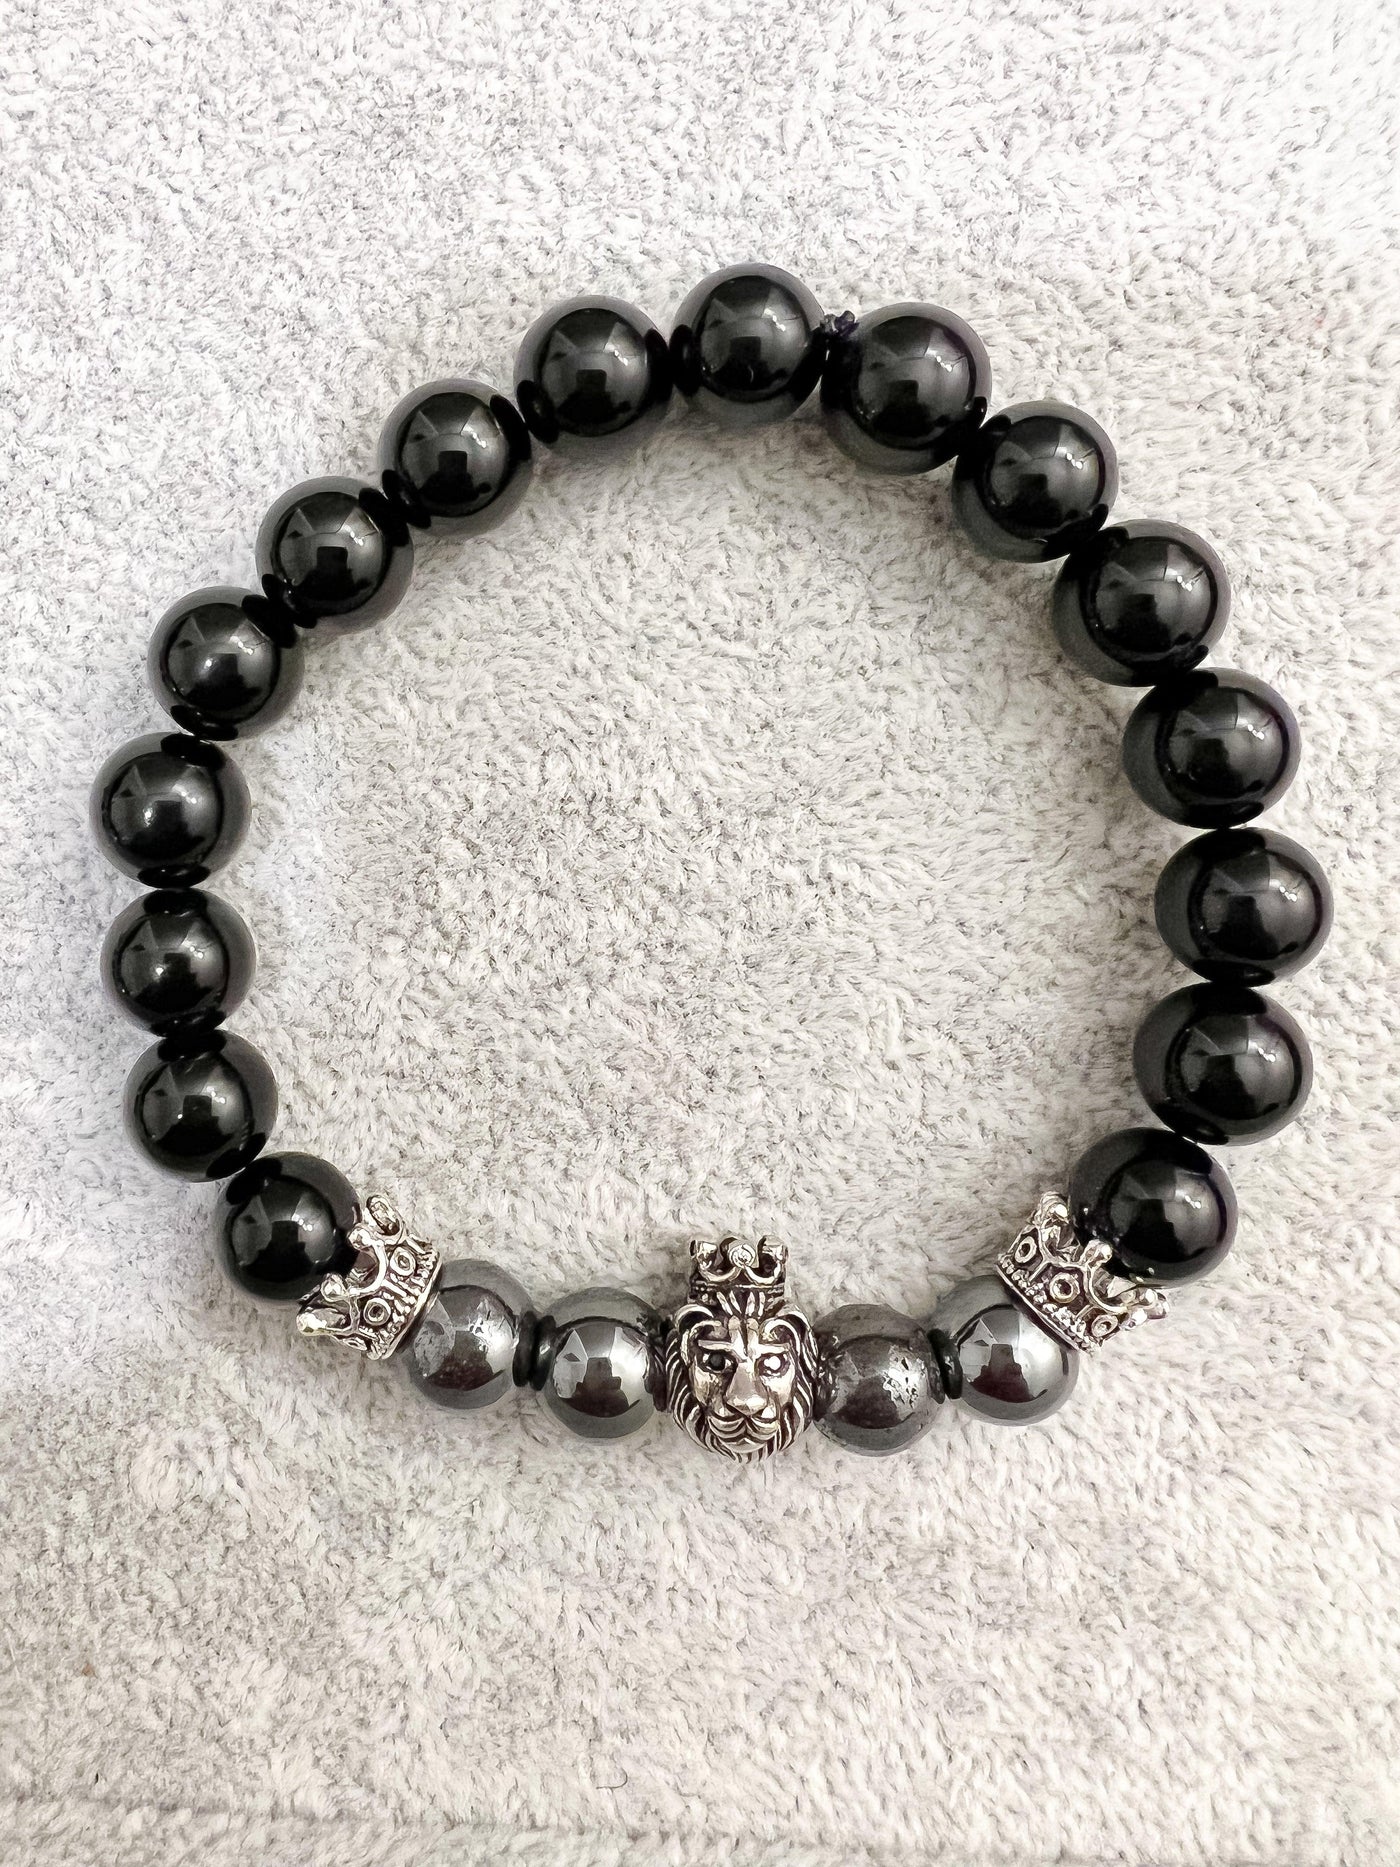 Silver Lion with Silver Crowns and Black Fauceted Bead Bracelet - Brent's Bling